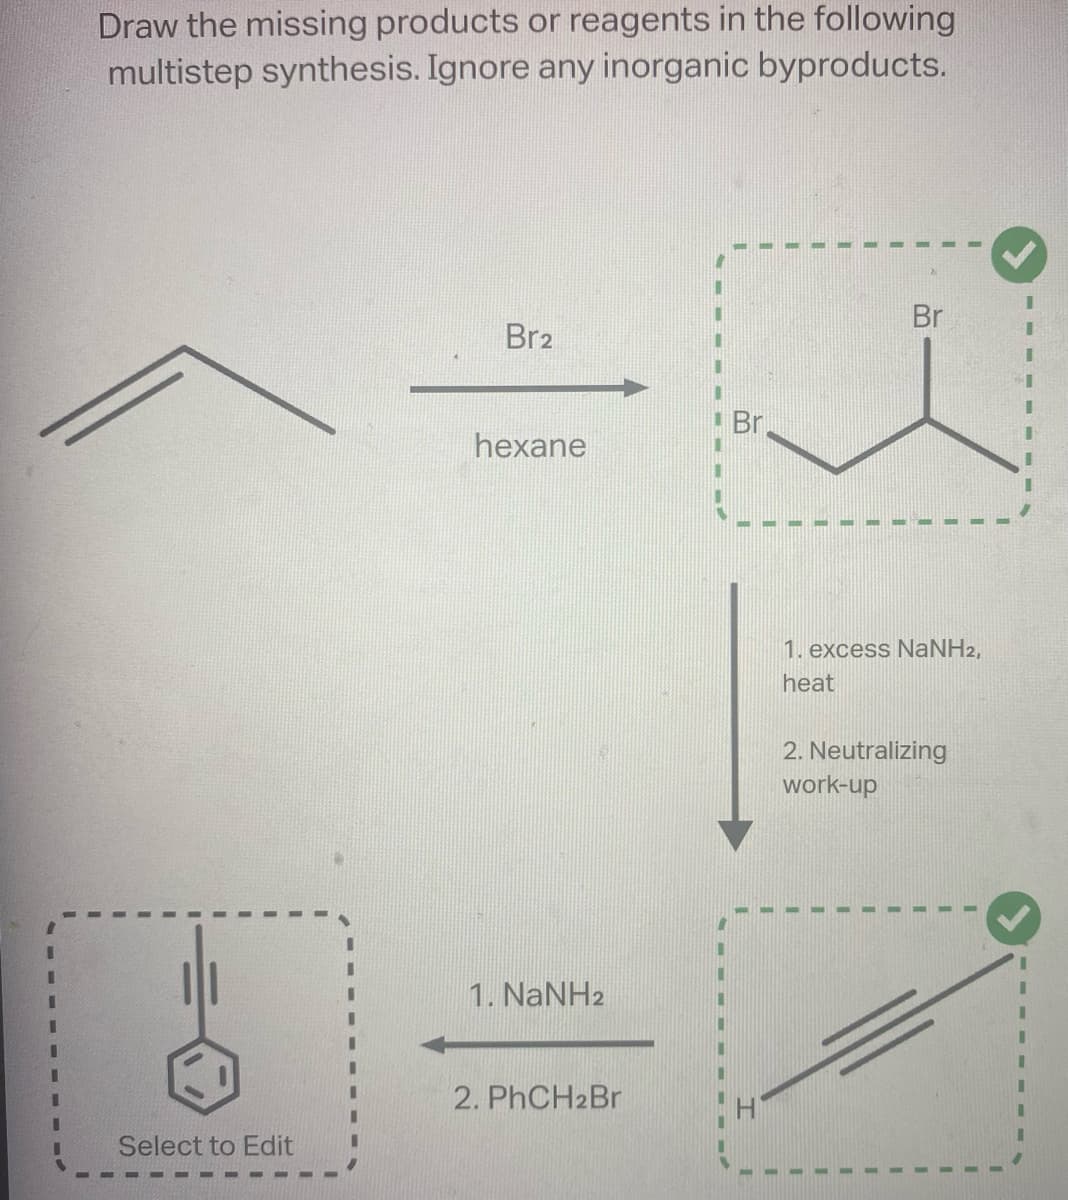 Draw the missing products or reagents in the following
multistep synthesis. Ignore any inorganic byproducts.
Select to Edit
Br2
hexane
1. NaNH2
2. PhCH2Br
Br
Br
1. excess NaNH2,
heat
2. Neutralizing
work-up
I
I